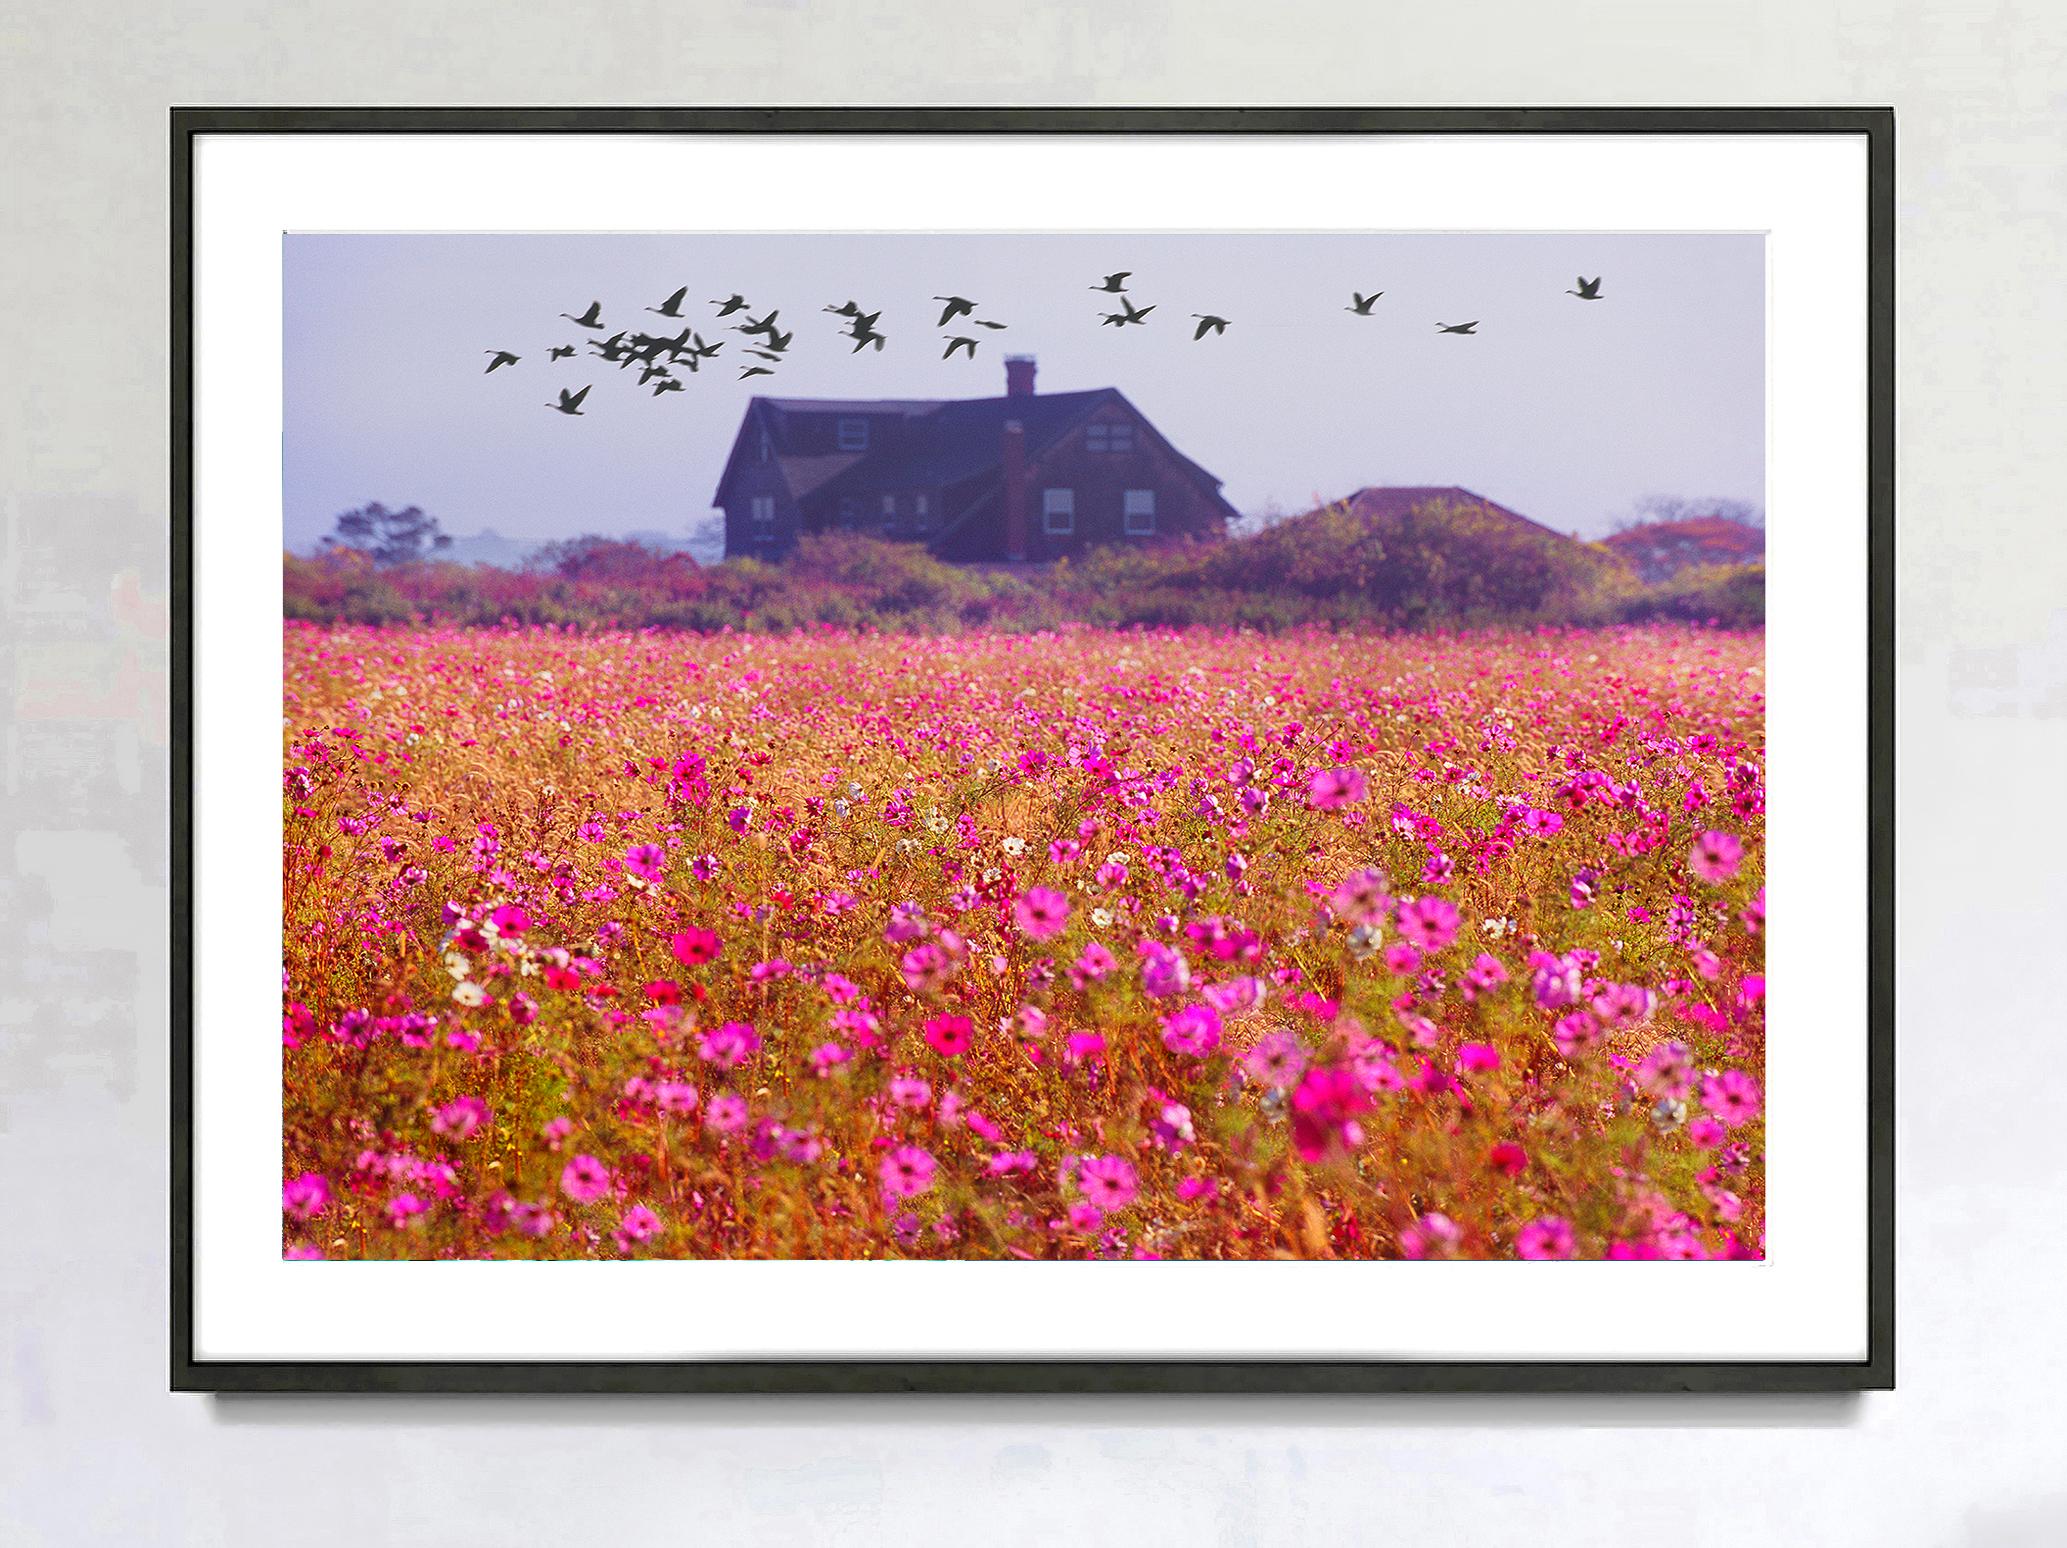 East Hampton Landscape with Field of Pink Flowers and Migrating Birds Monet - Photograph by Mitchell Funk